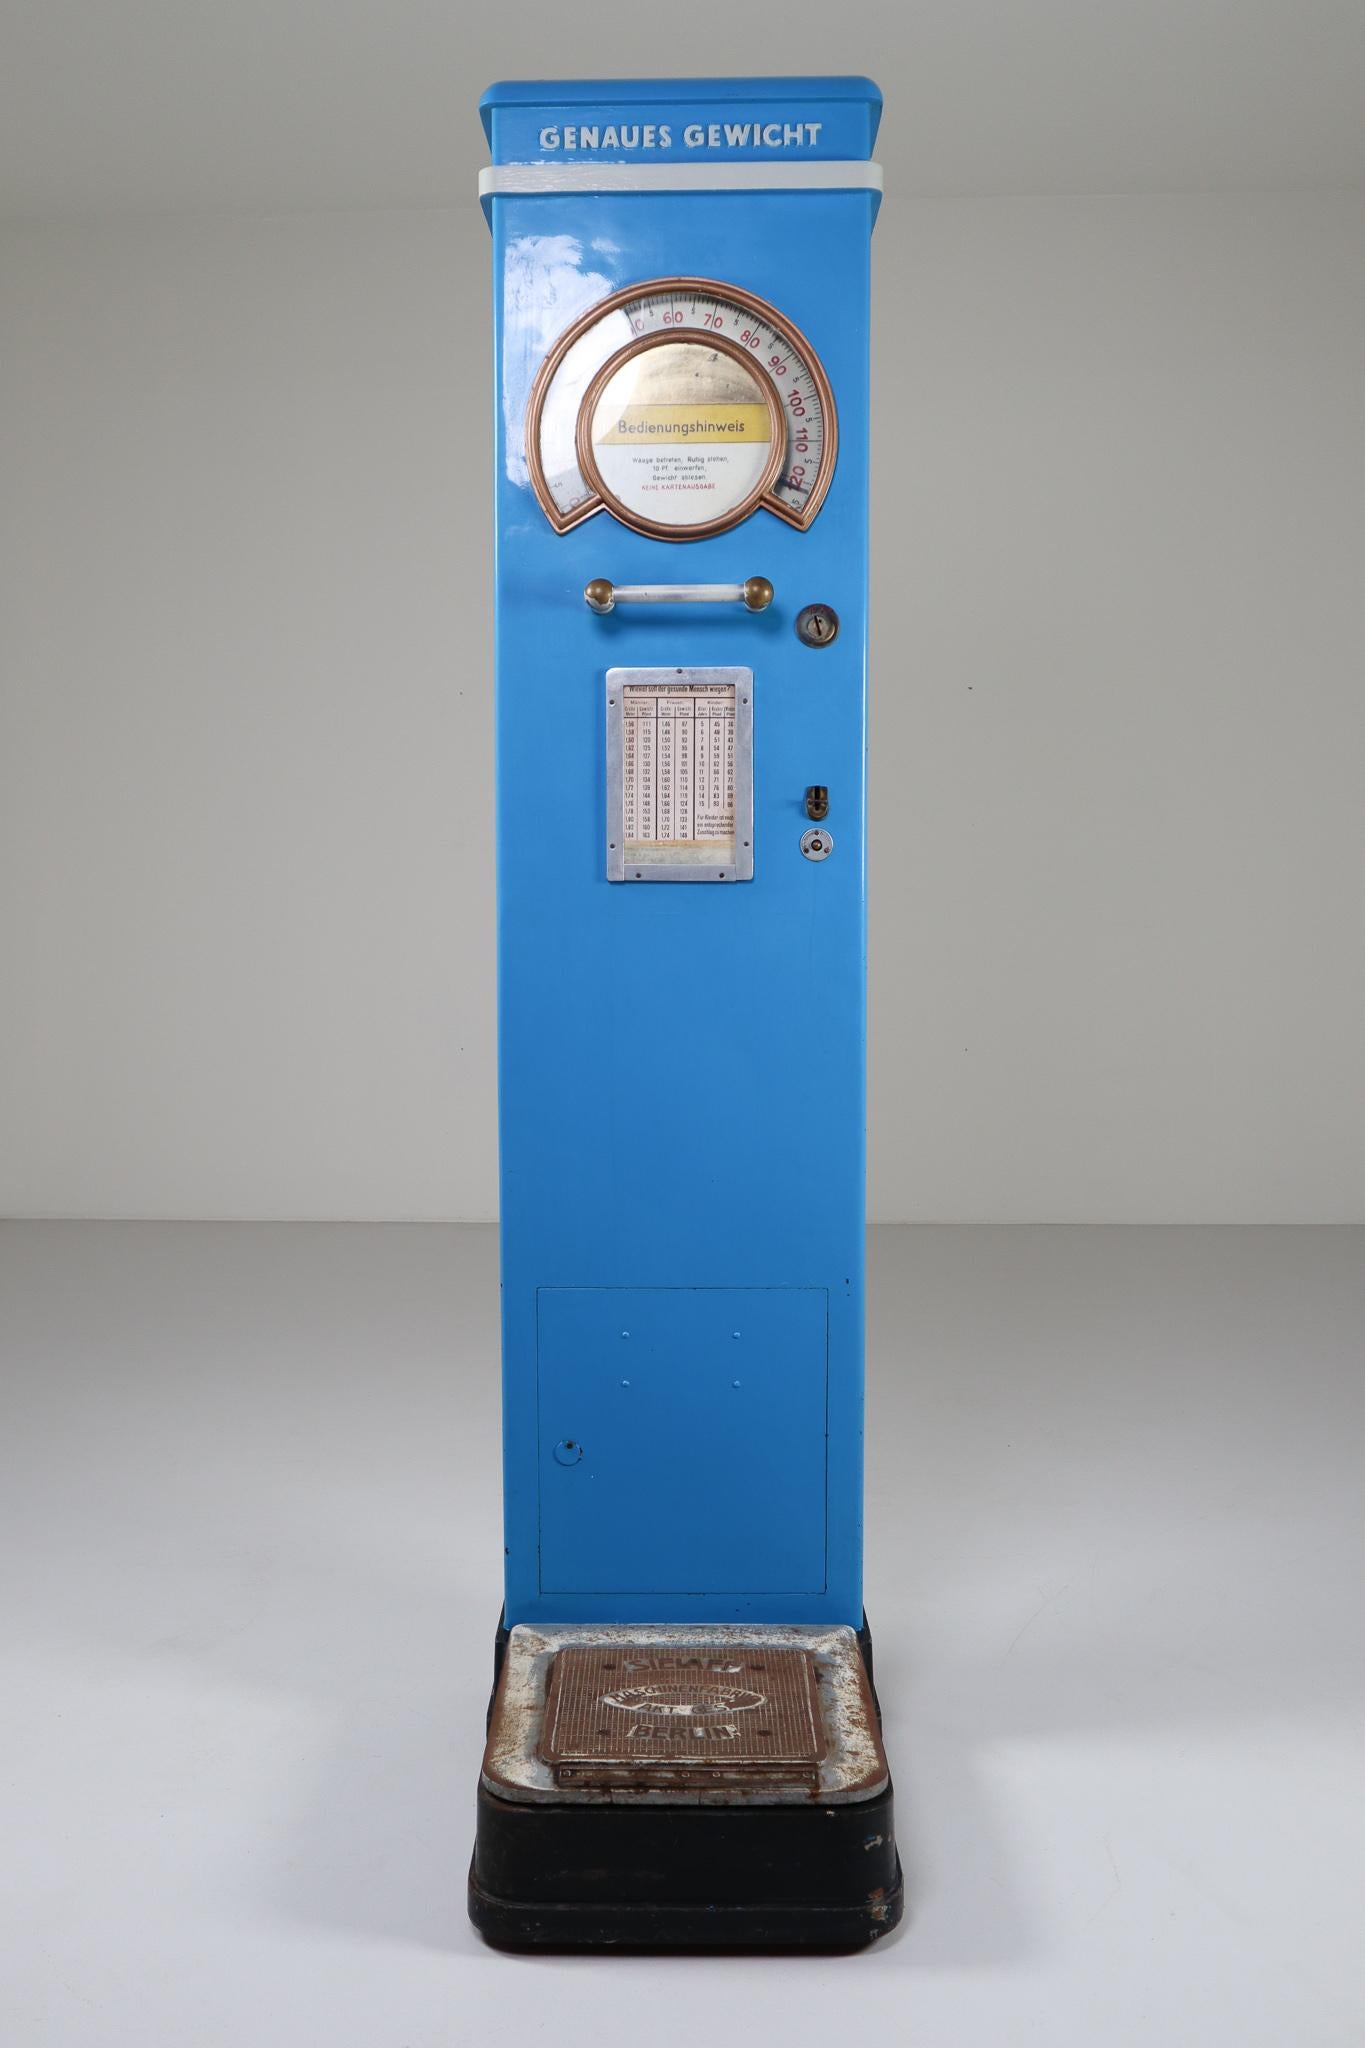 Sielaff Maschinenfabrik AG Personen Waage/Scale Berlin 1930 in Bleu enamel color. Amazing good original condition.

In June 1887, engineer Max Sielaff in Berlin was the first to receive a patent for a “vending machine”. After more than 125 years -